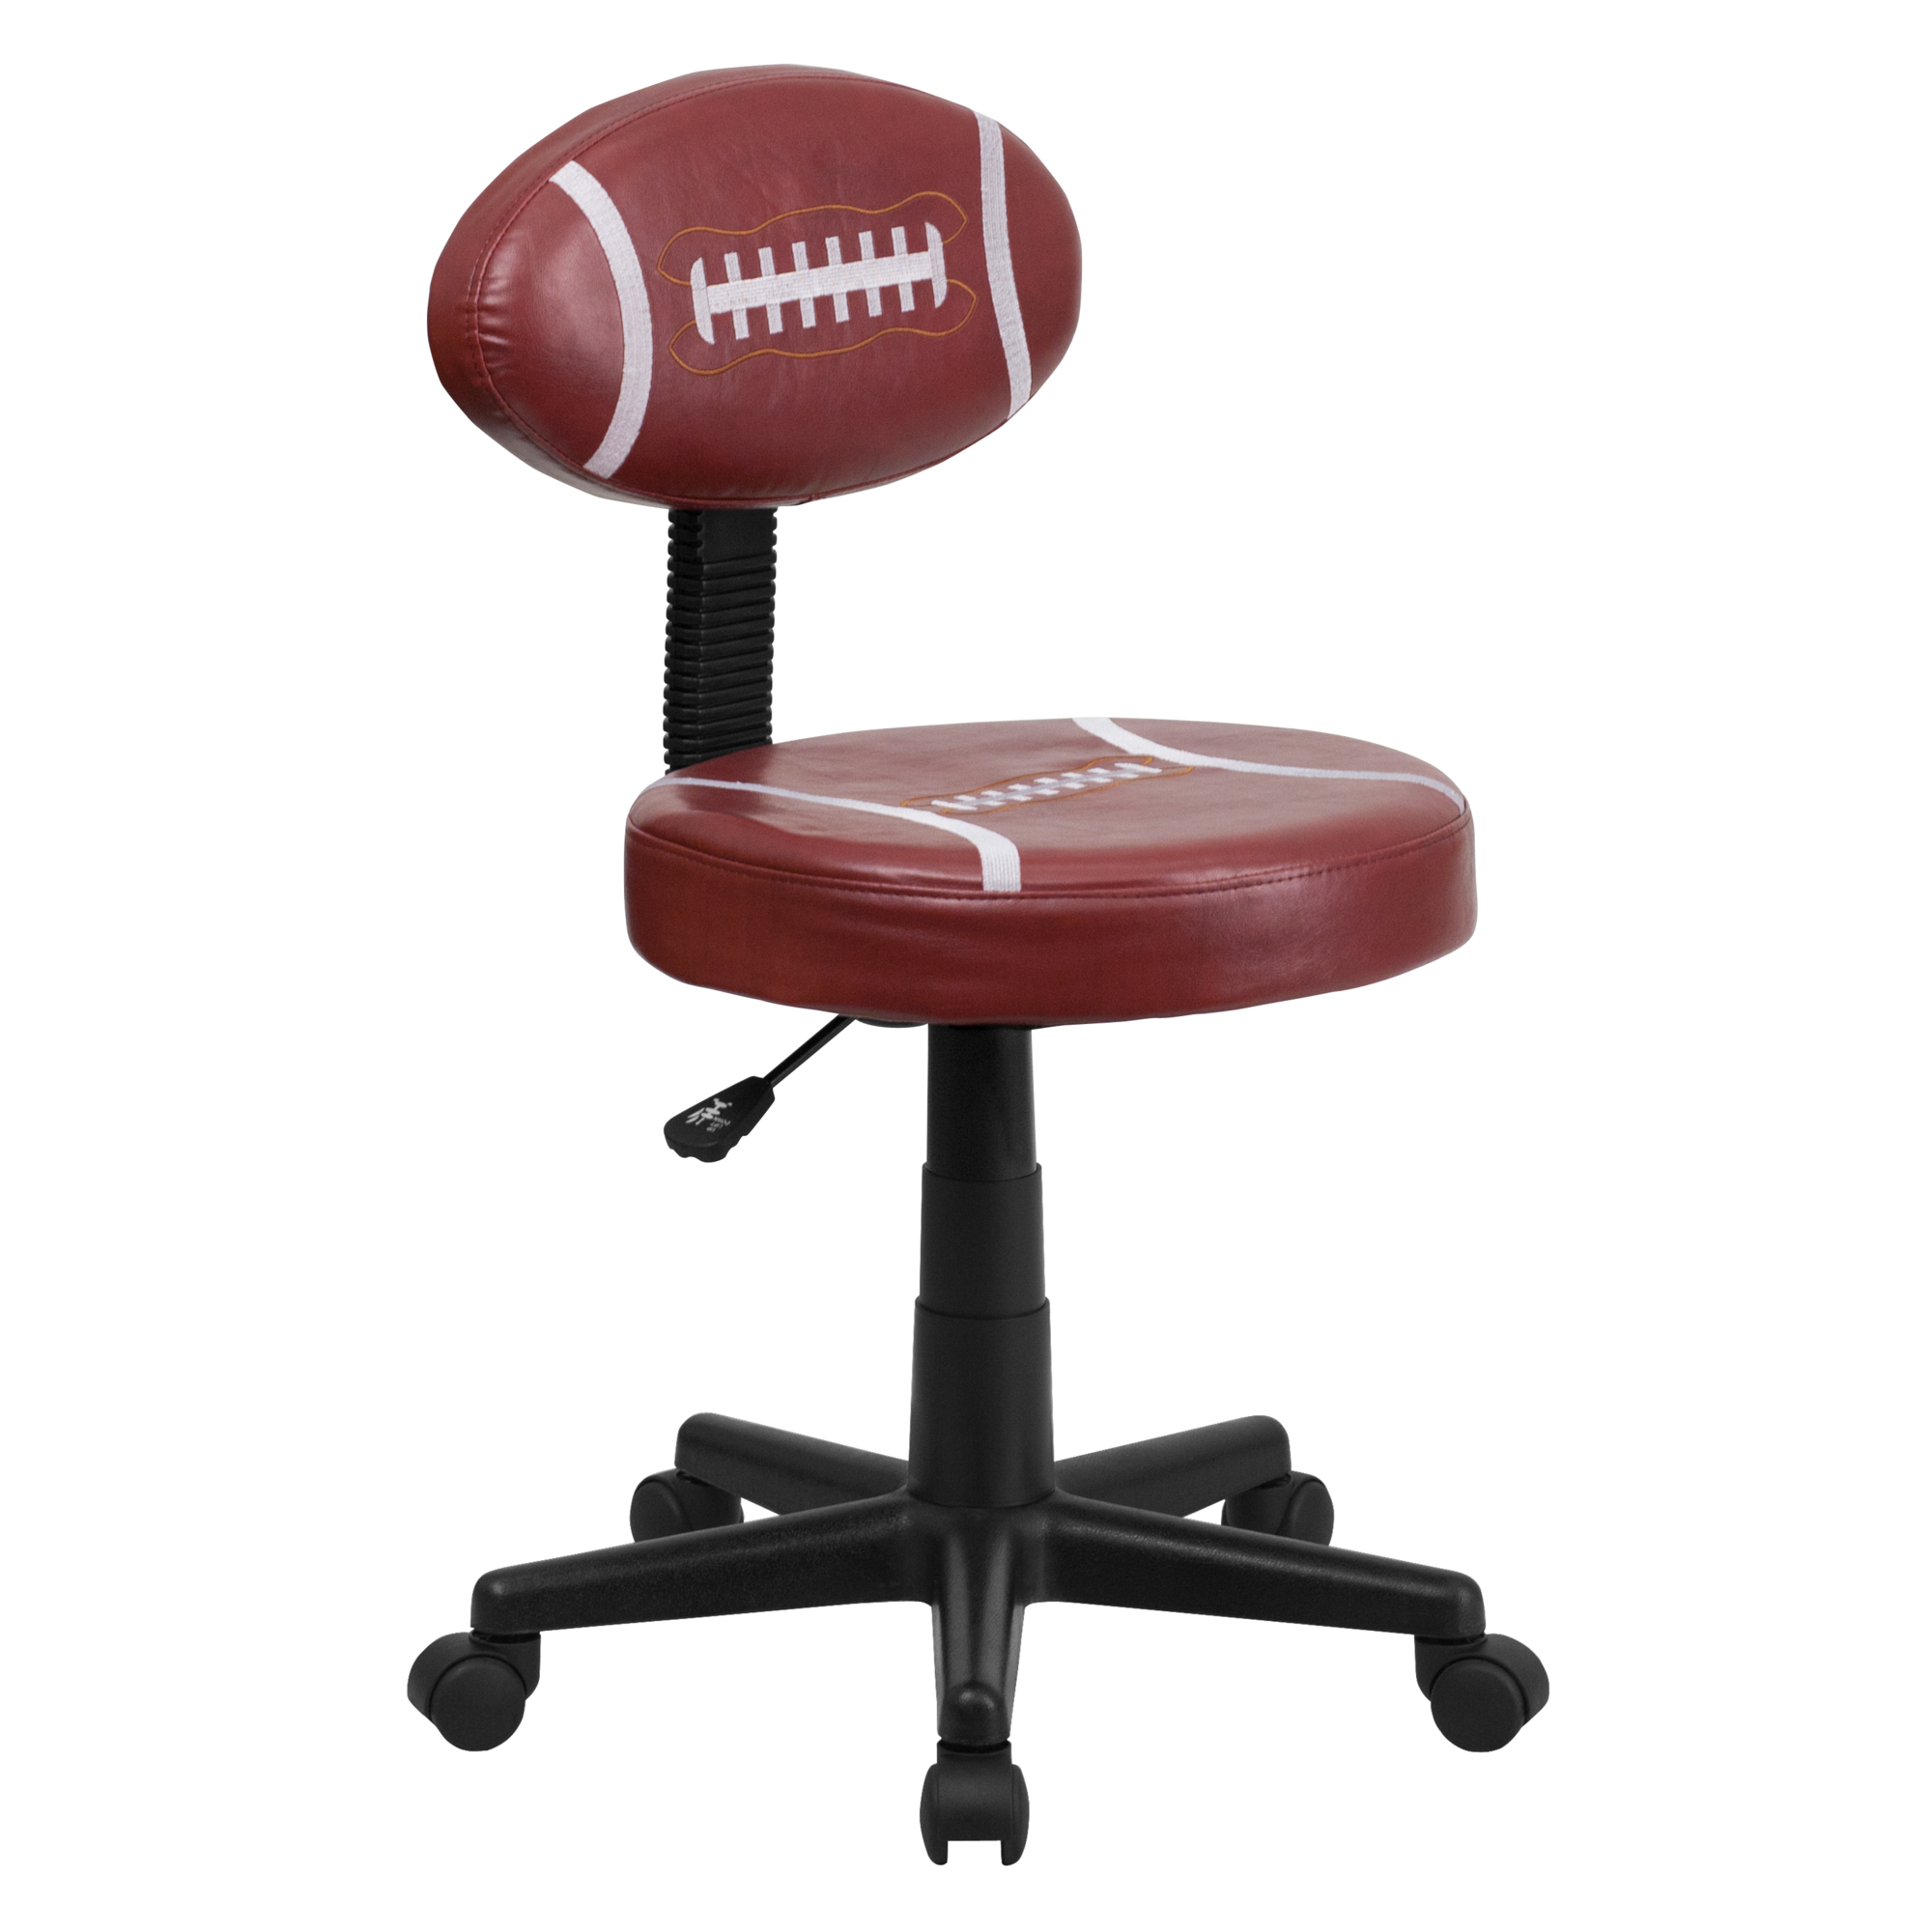 Flash Furniture, Football Vinyl Upholstered Swivel Task Chair, Primary Color Brown, Included (qty.) 1, Model BT6181FOOT